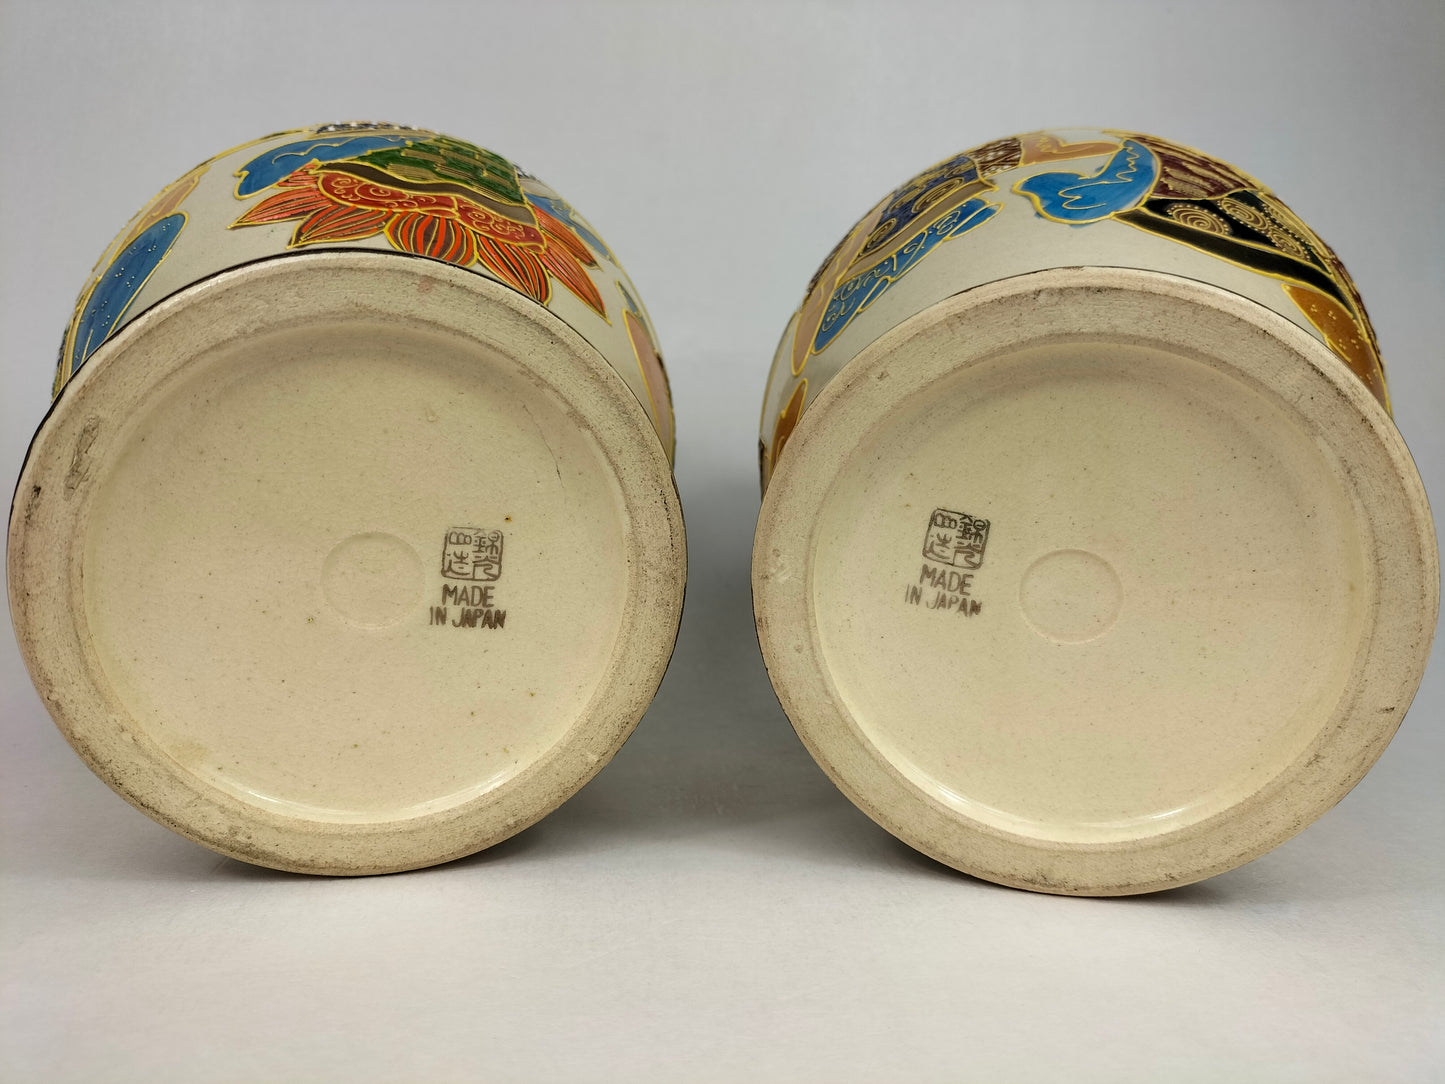 Antique pair of Japanese satsuma vases with figures and dragons // Early 20th century